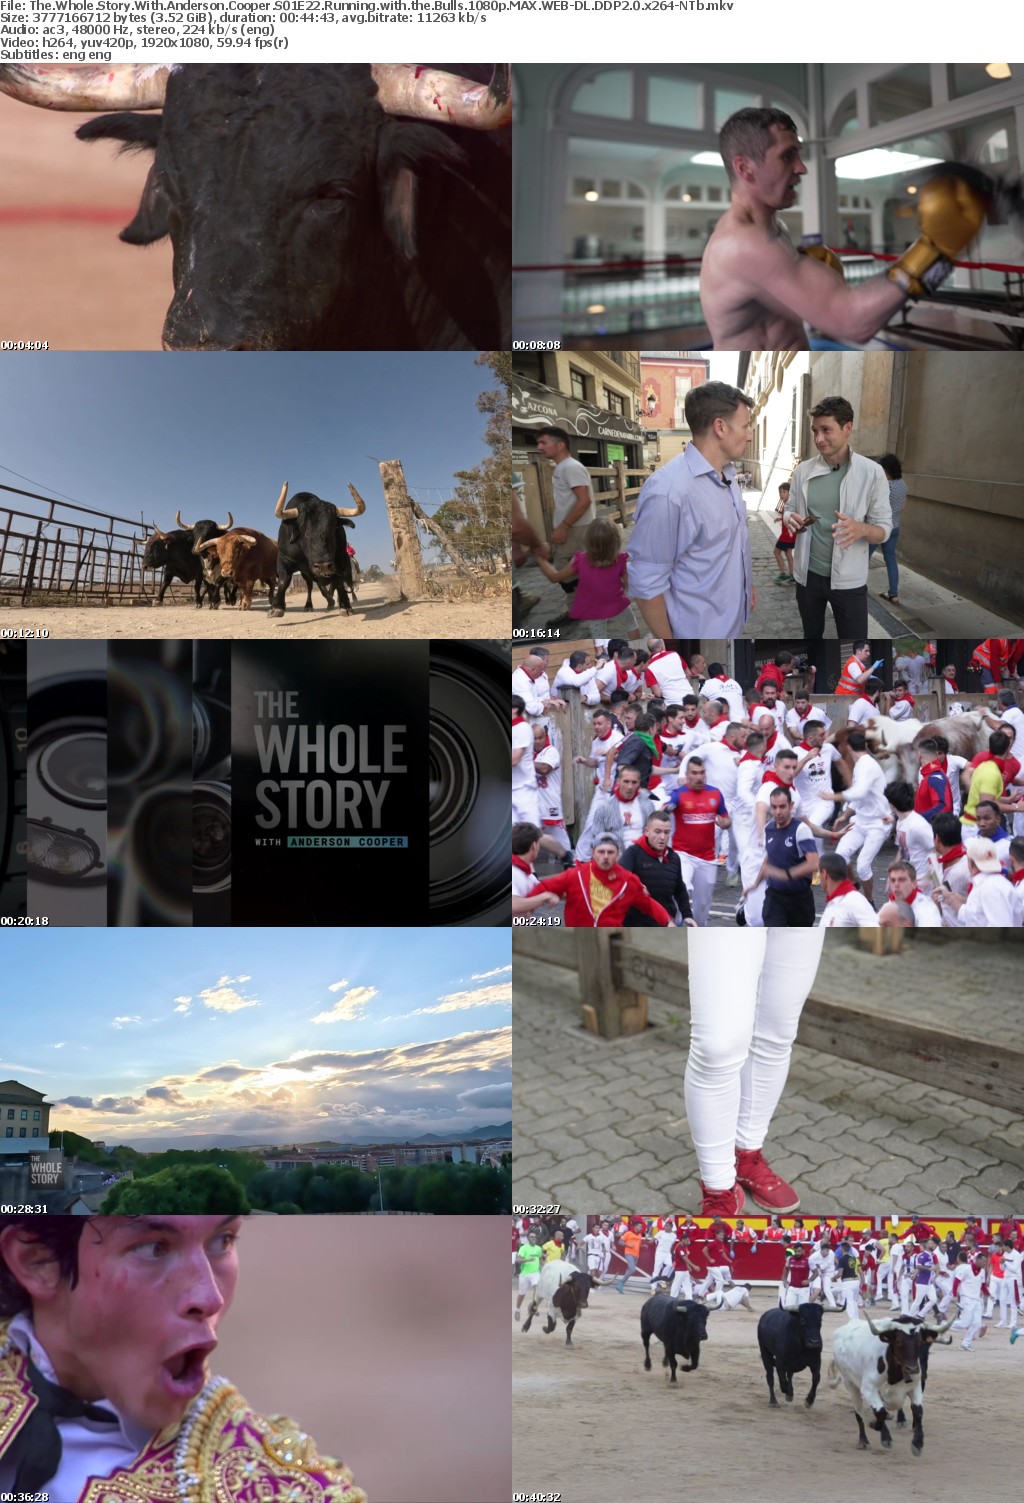 The Whole Story With Anderson Cooper S01E22 Running with the Bulls 1080p MAX WEB-DL DDP2 0 x264-NTb